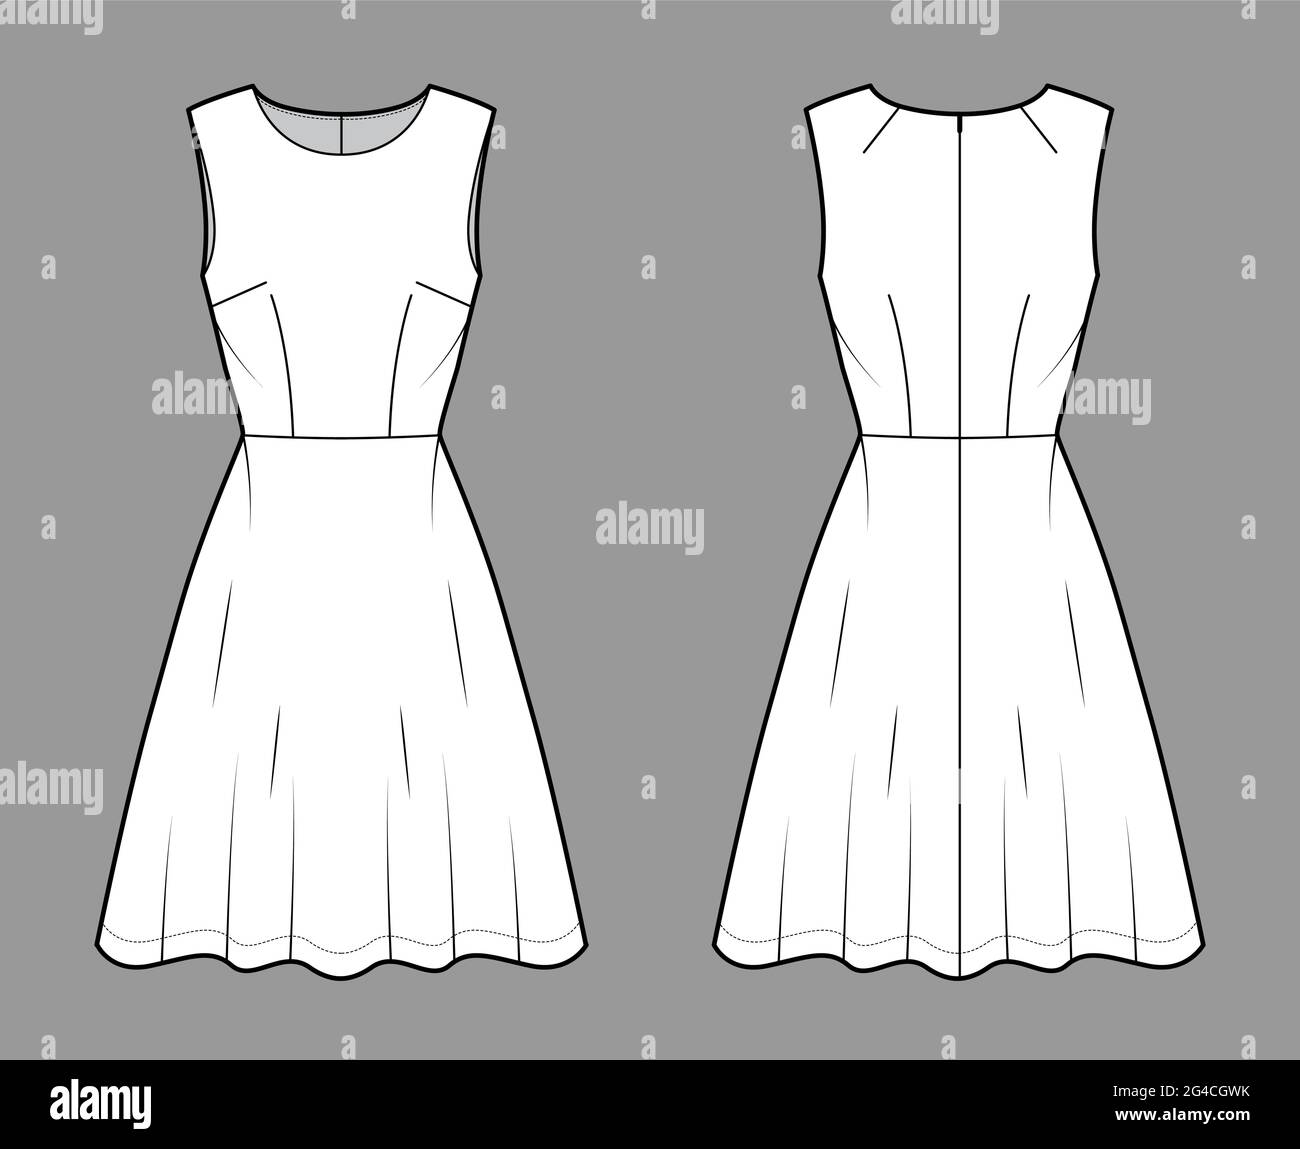 Dress flared skater technical fashion illustration with sleeveless, fitted body, knee length semi-circular skirt. Flat apparel front, back, white colo Stock Vector